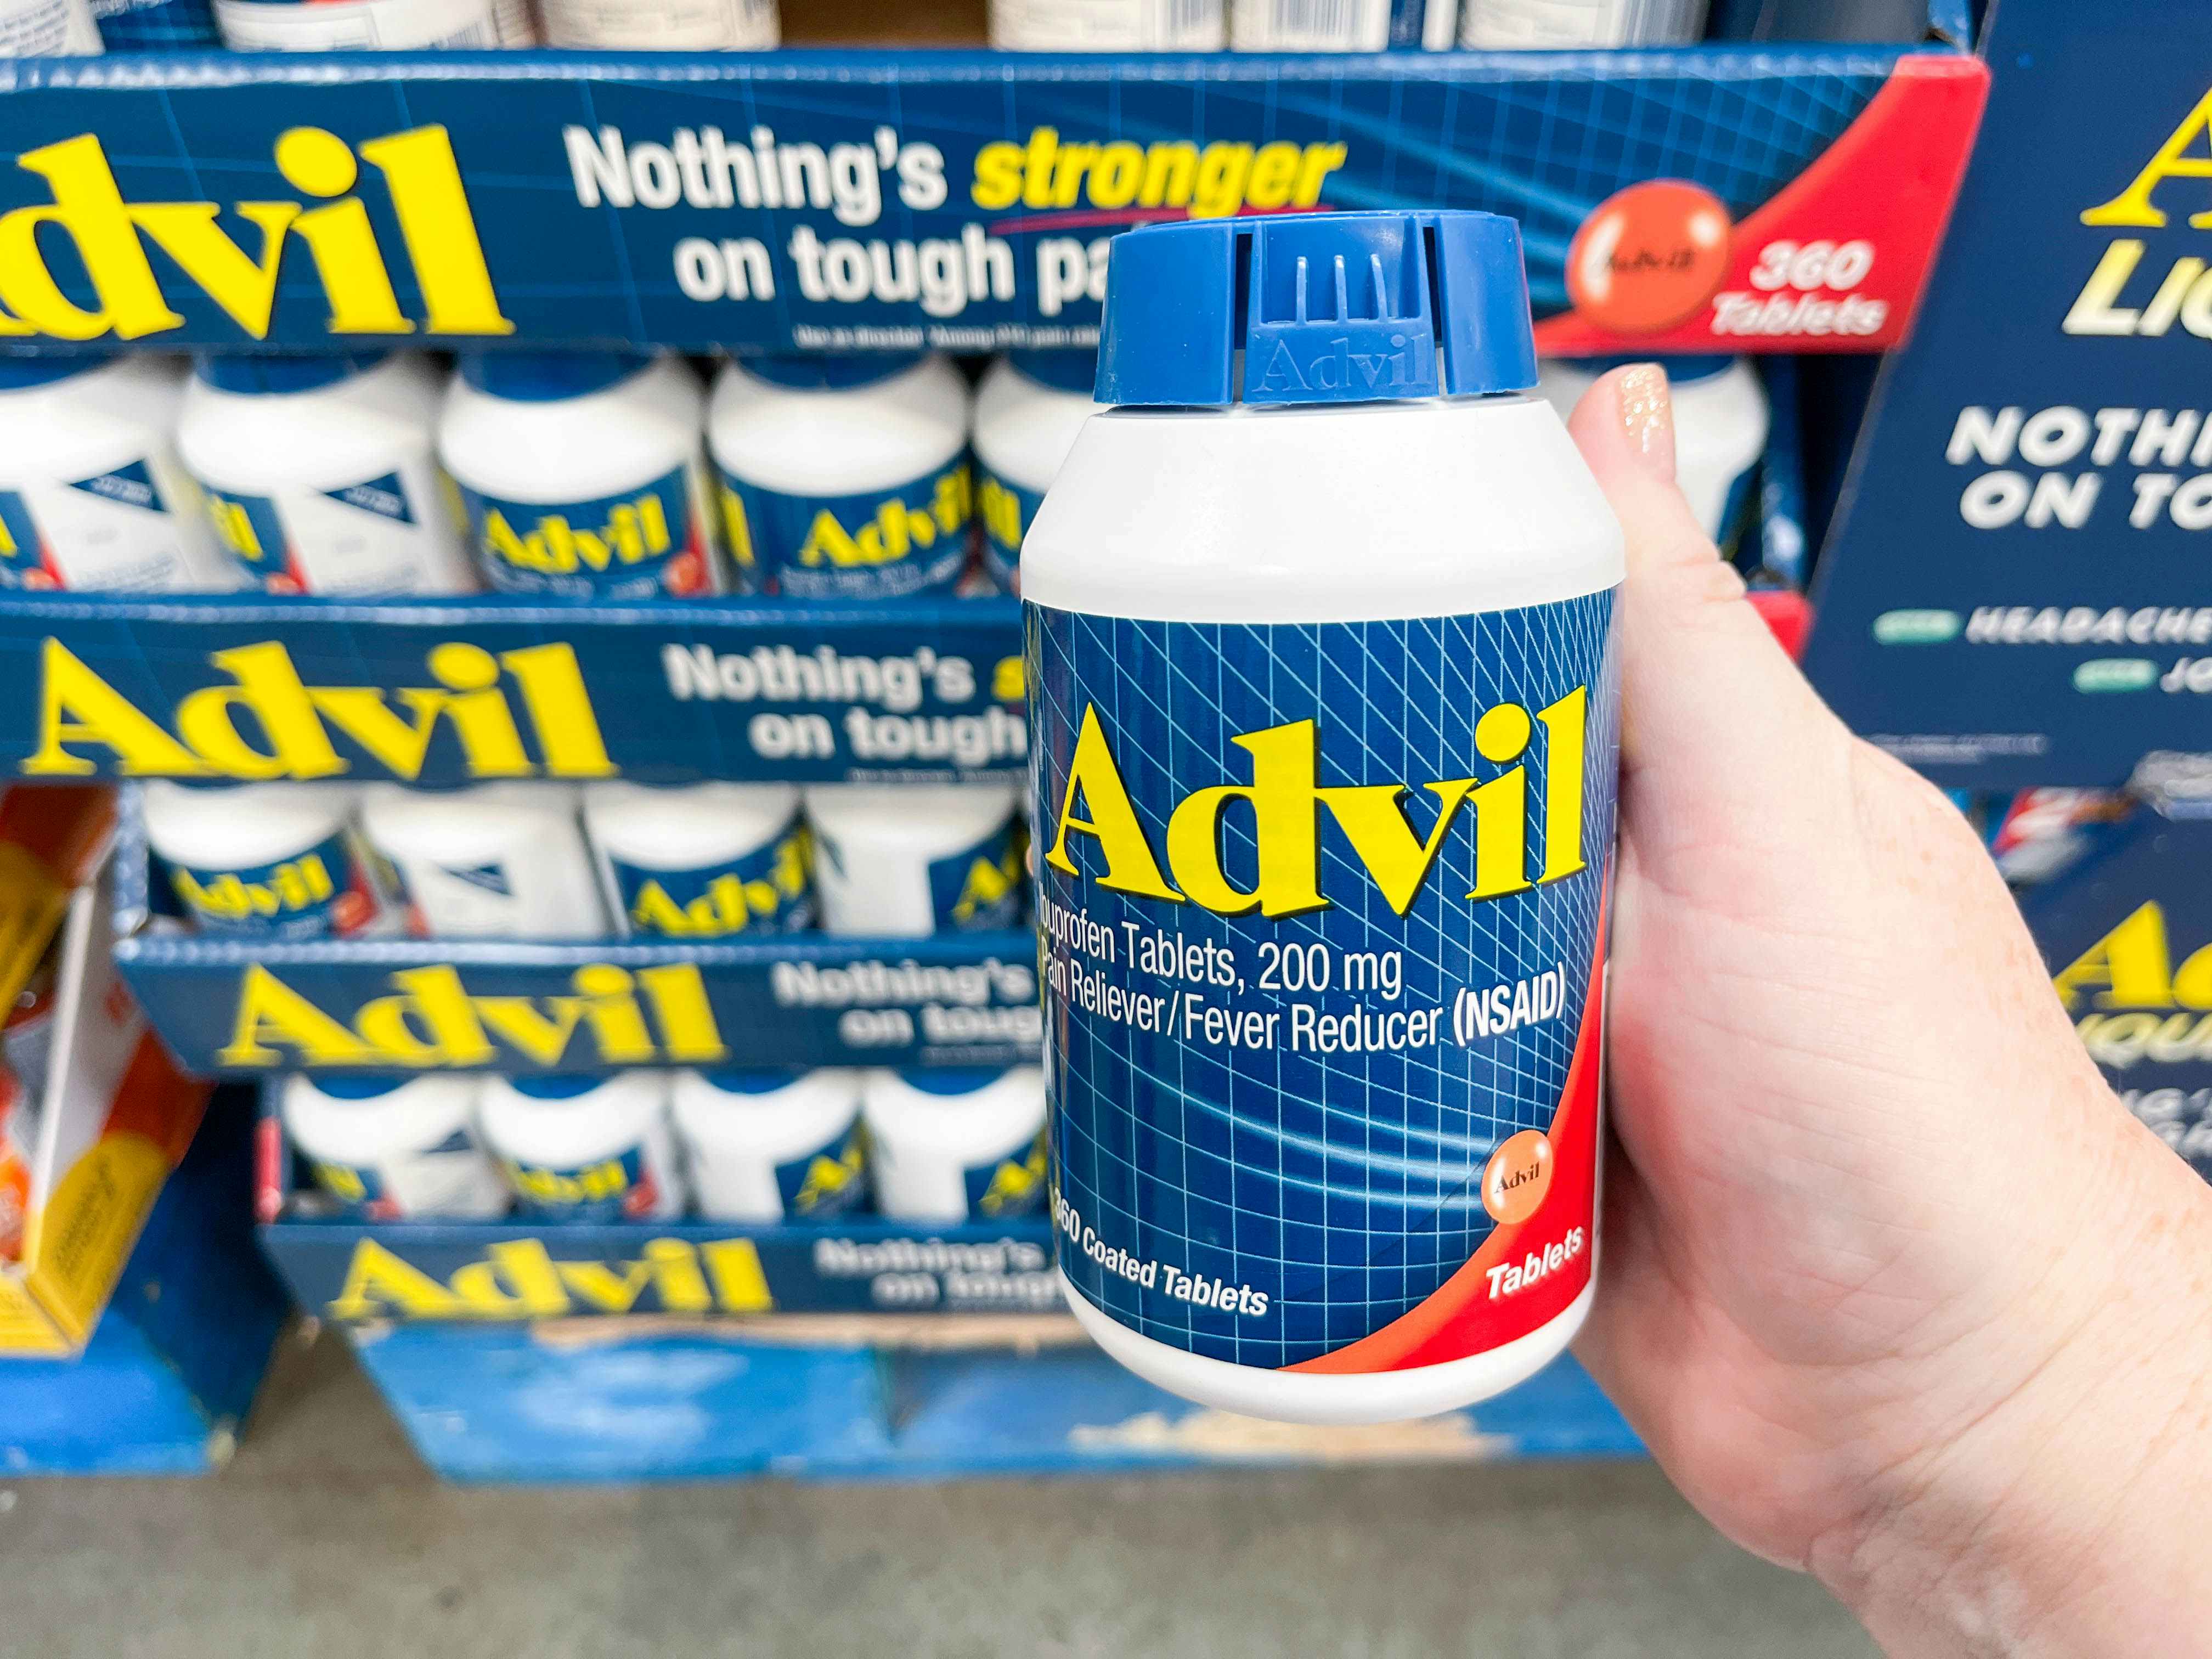 a bottle of advil being held in store